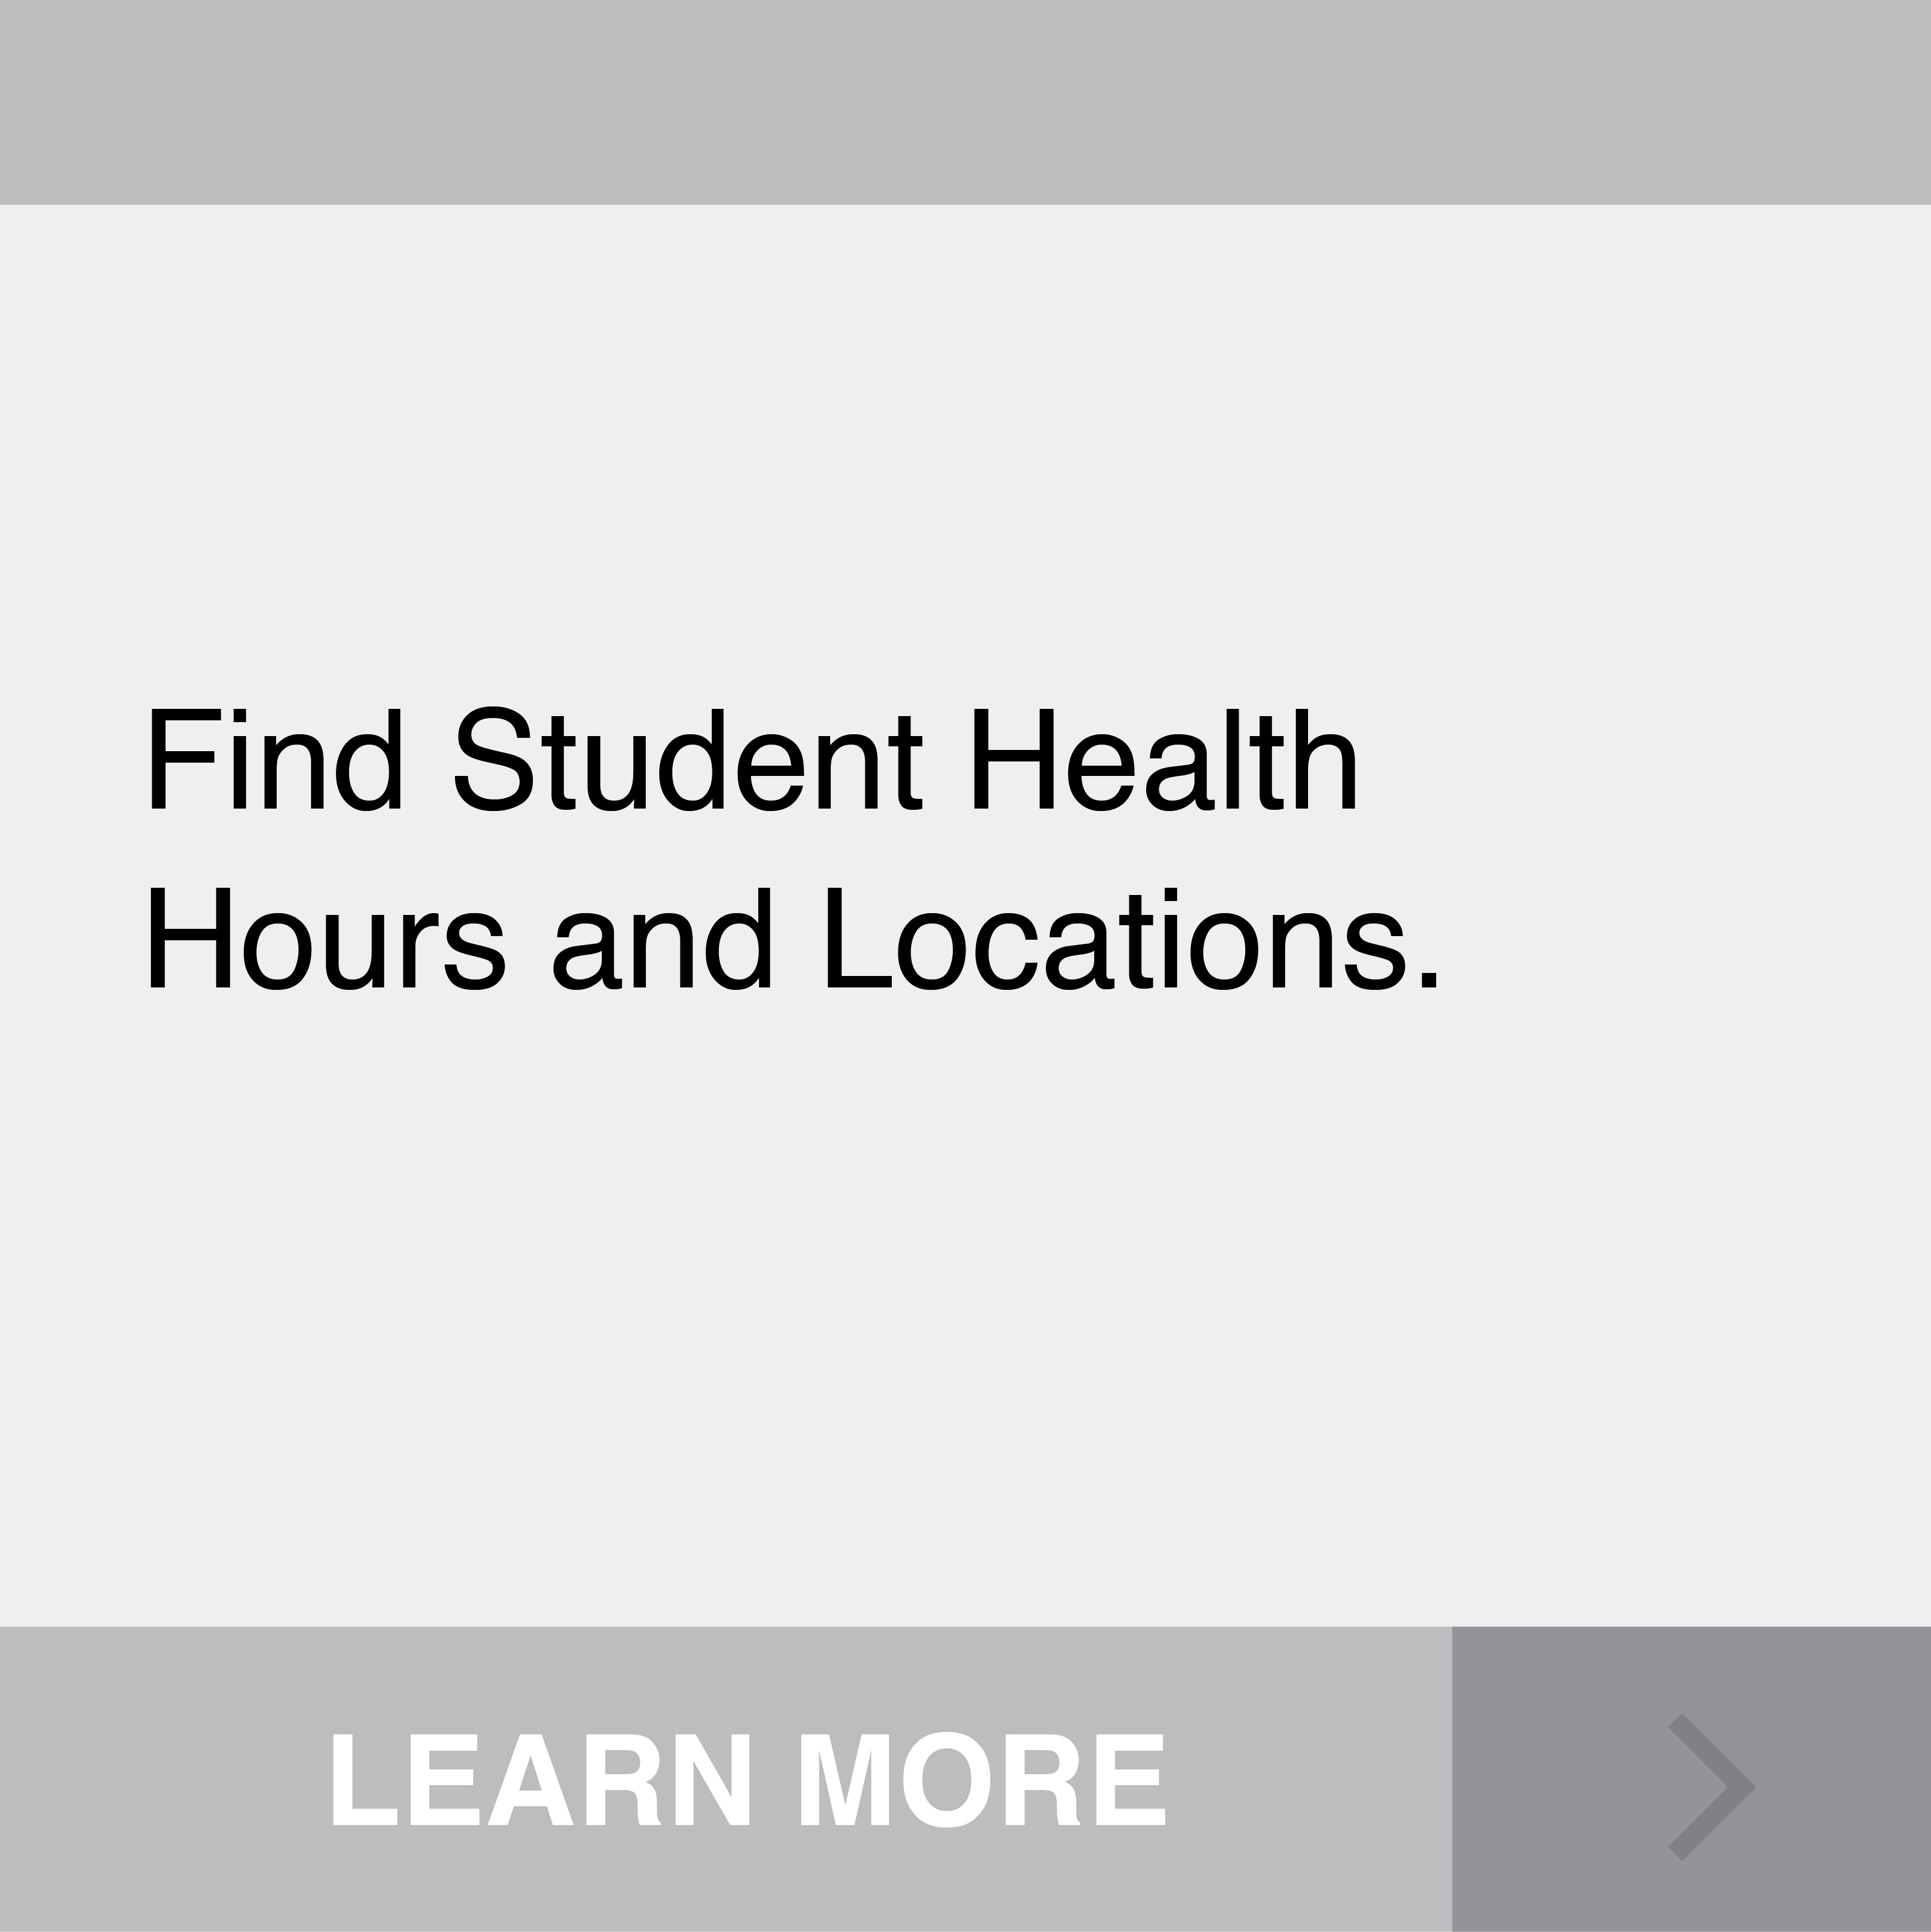 Find Student Health Hours and Locations. Click to Learn More.